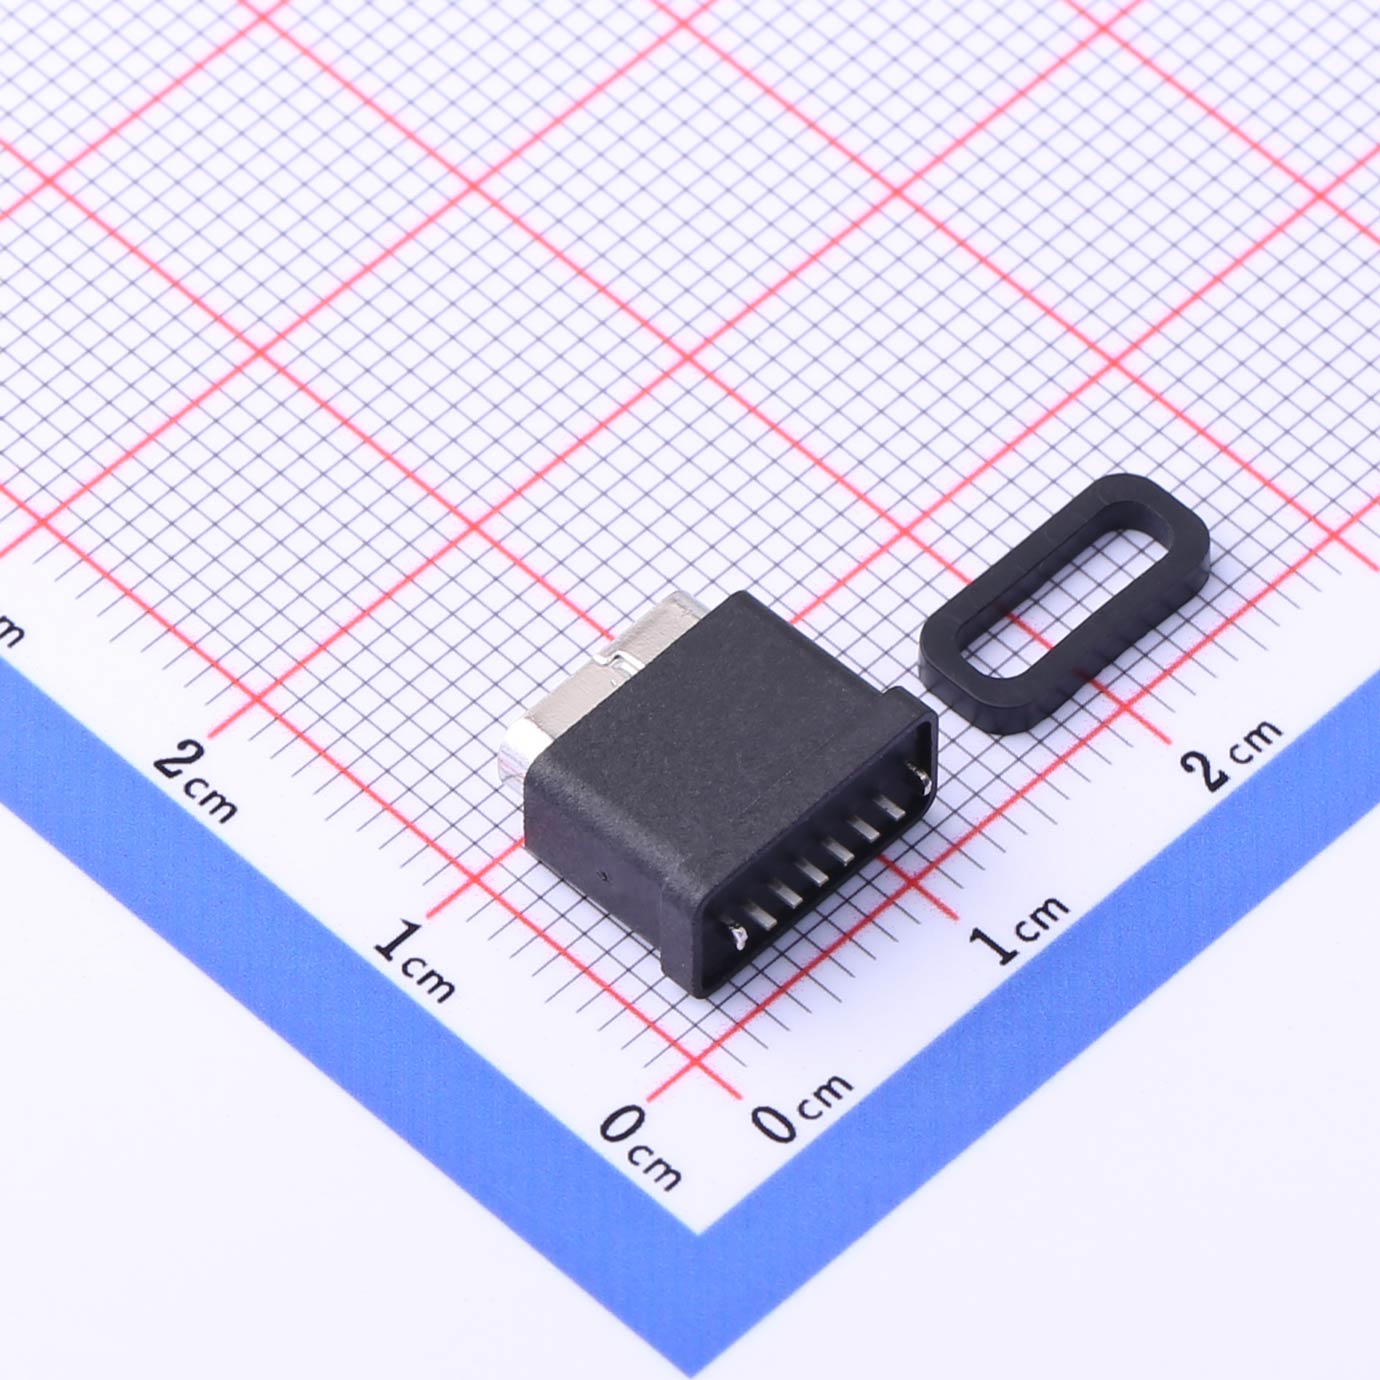 Kinghelm USB Type-C Connector female seat is inserted into two sets - KH-type-c-fs.l10-6p